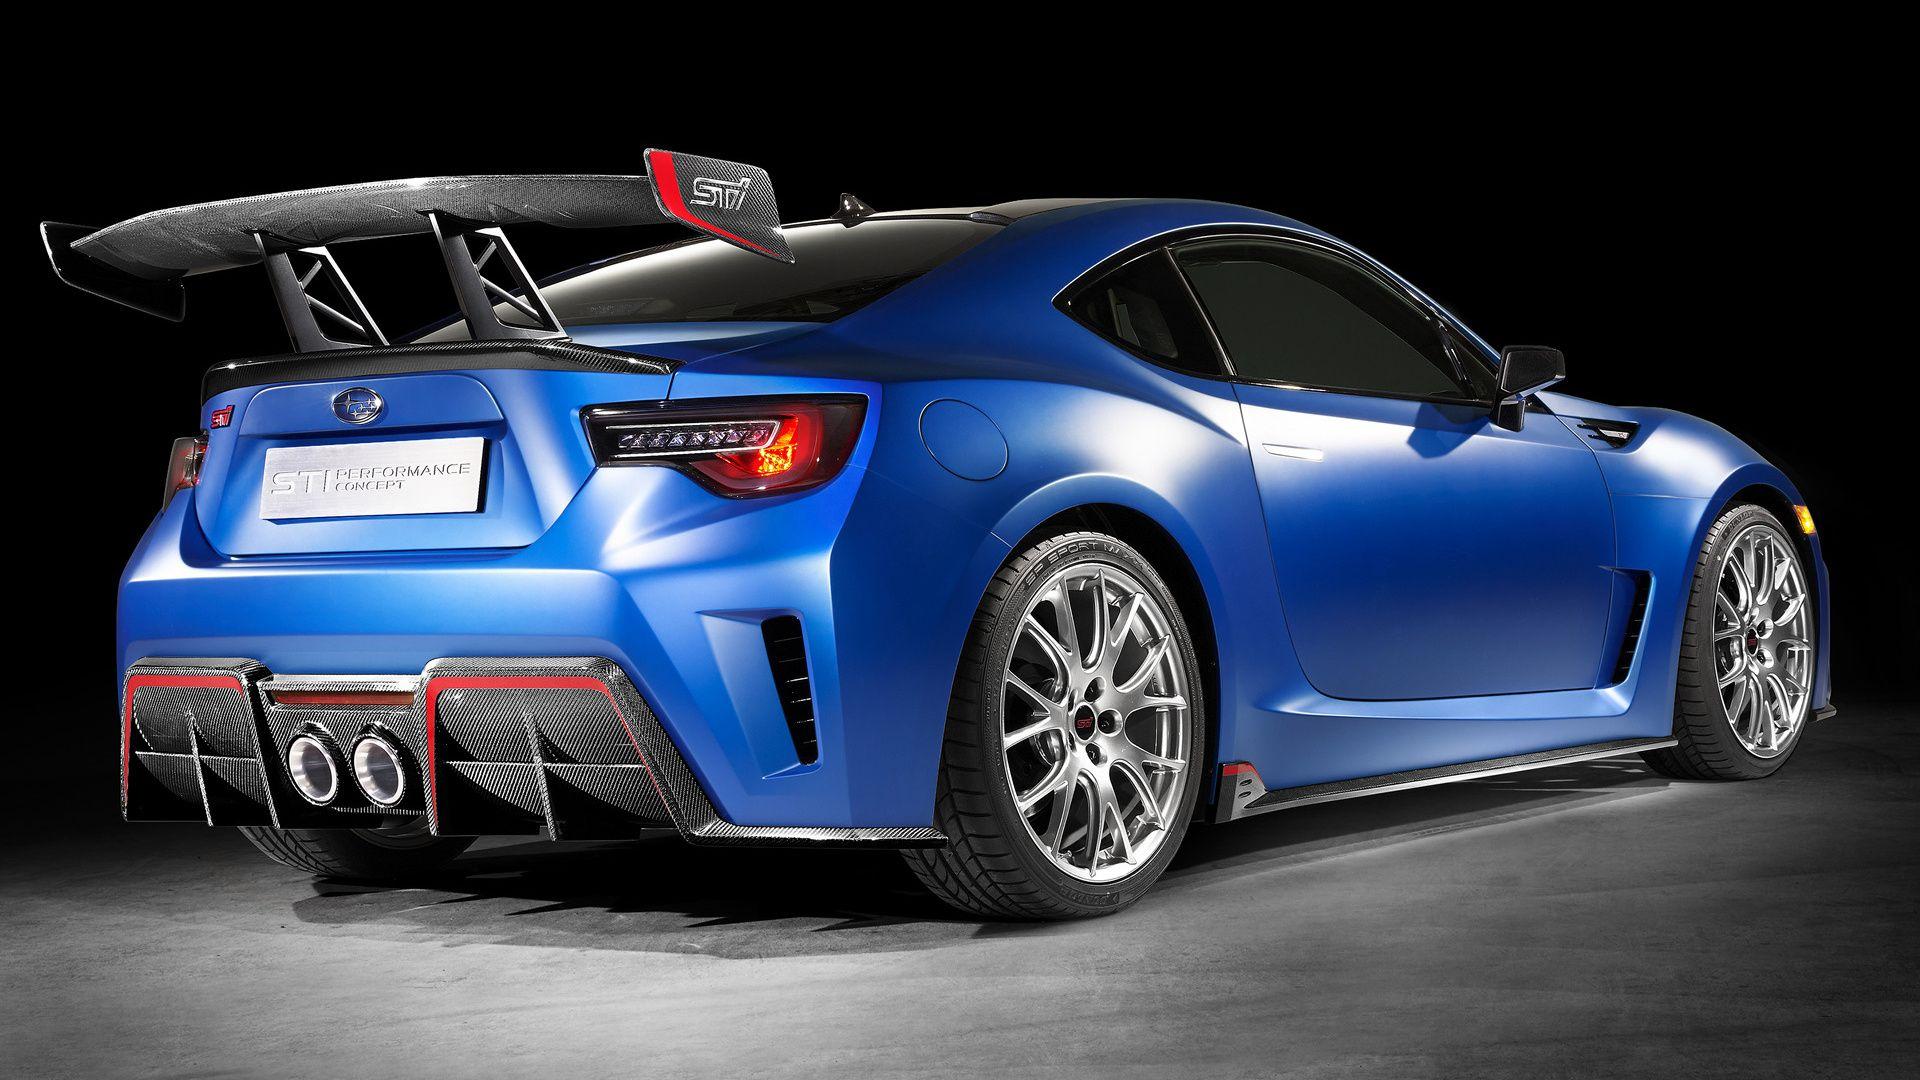 Subaru Brz Wallpaper HD Photo, Wallpaper and other Image